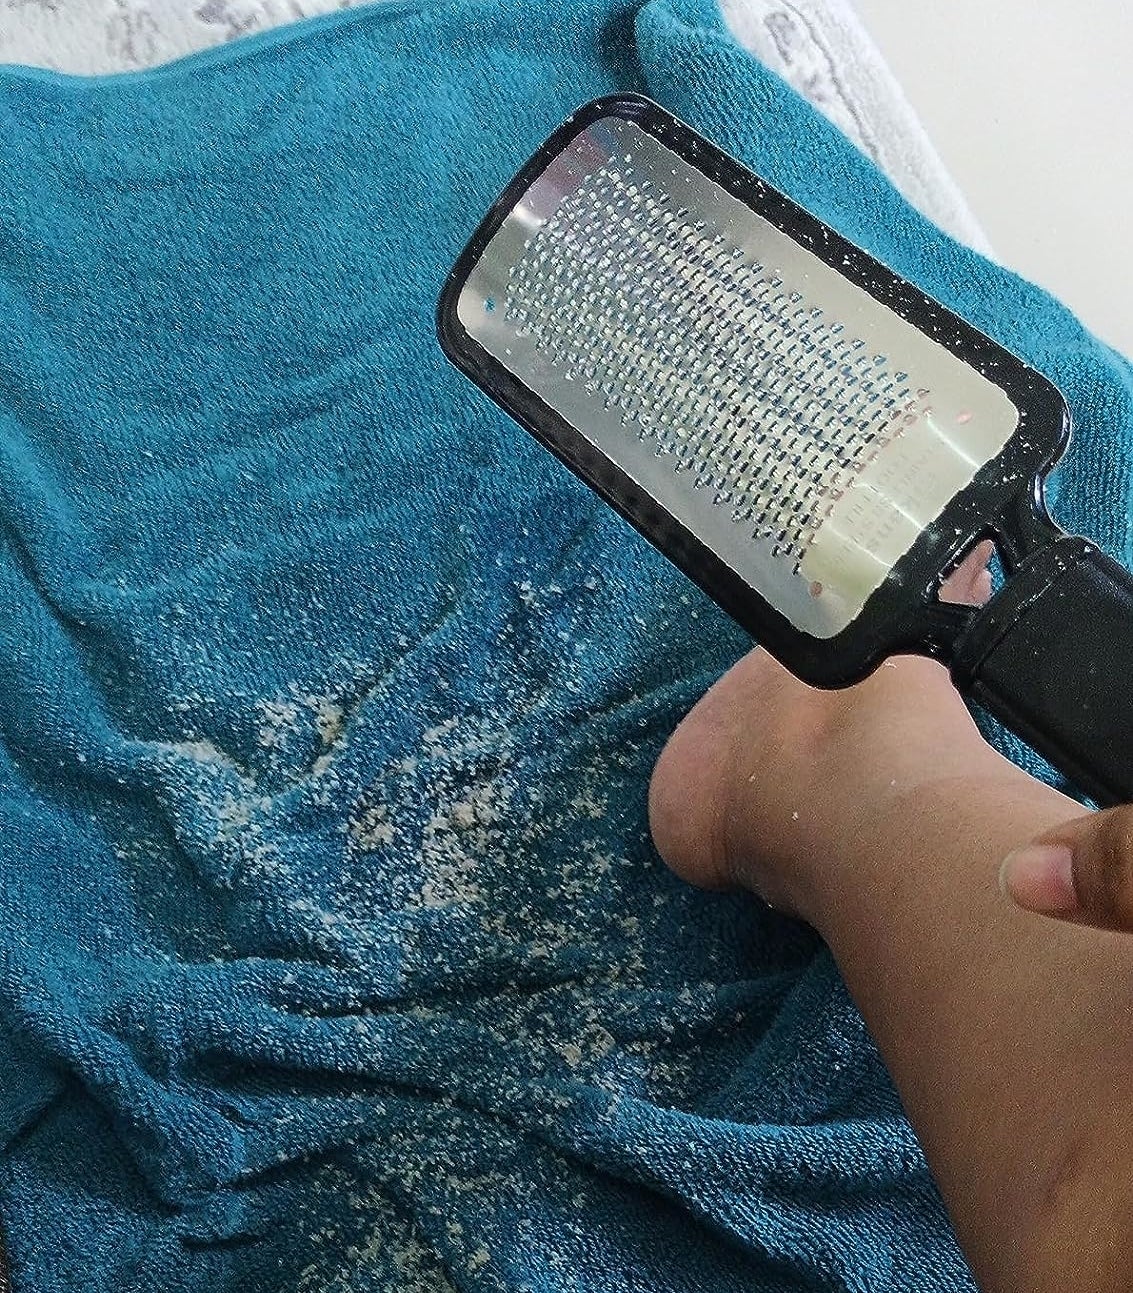 Reviewer’s photo of foot file and skin flakes on a towel